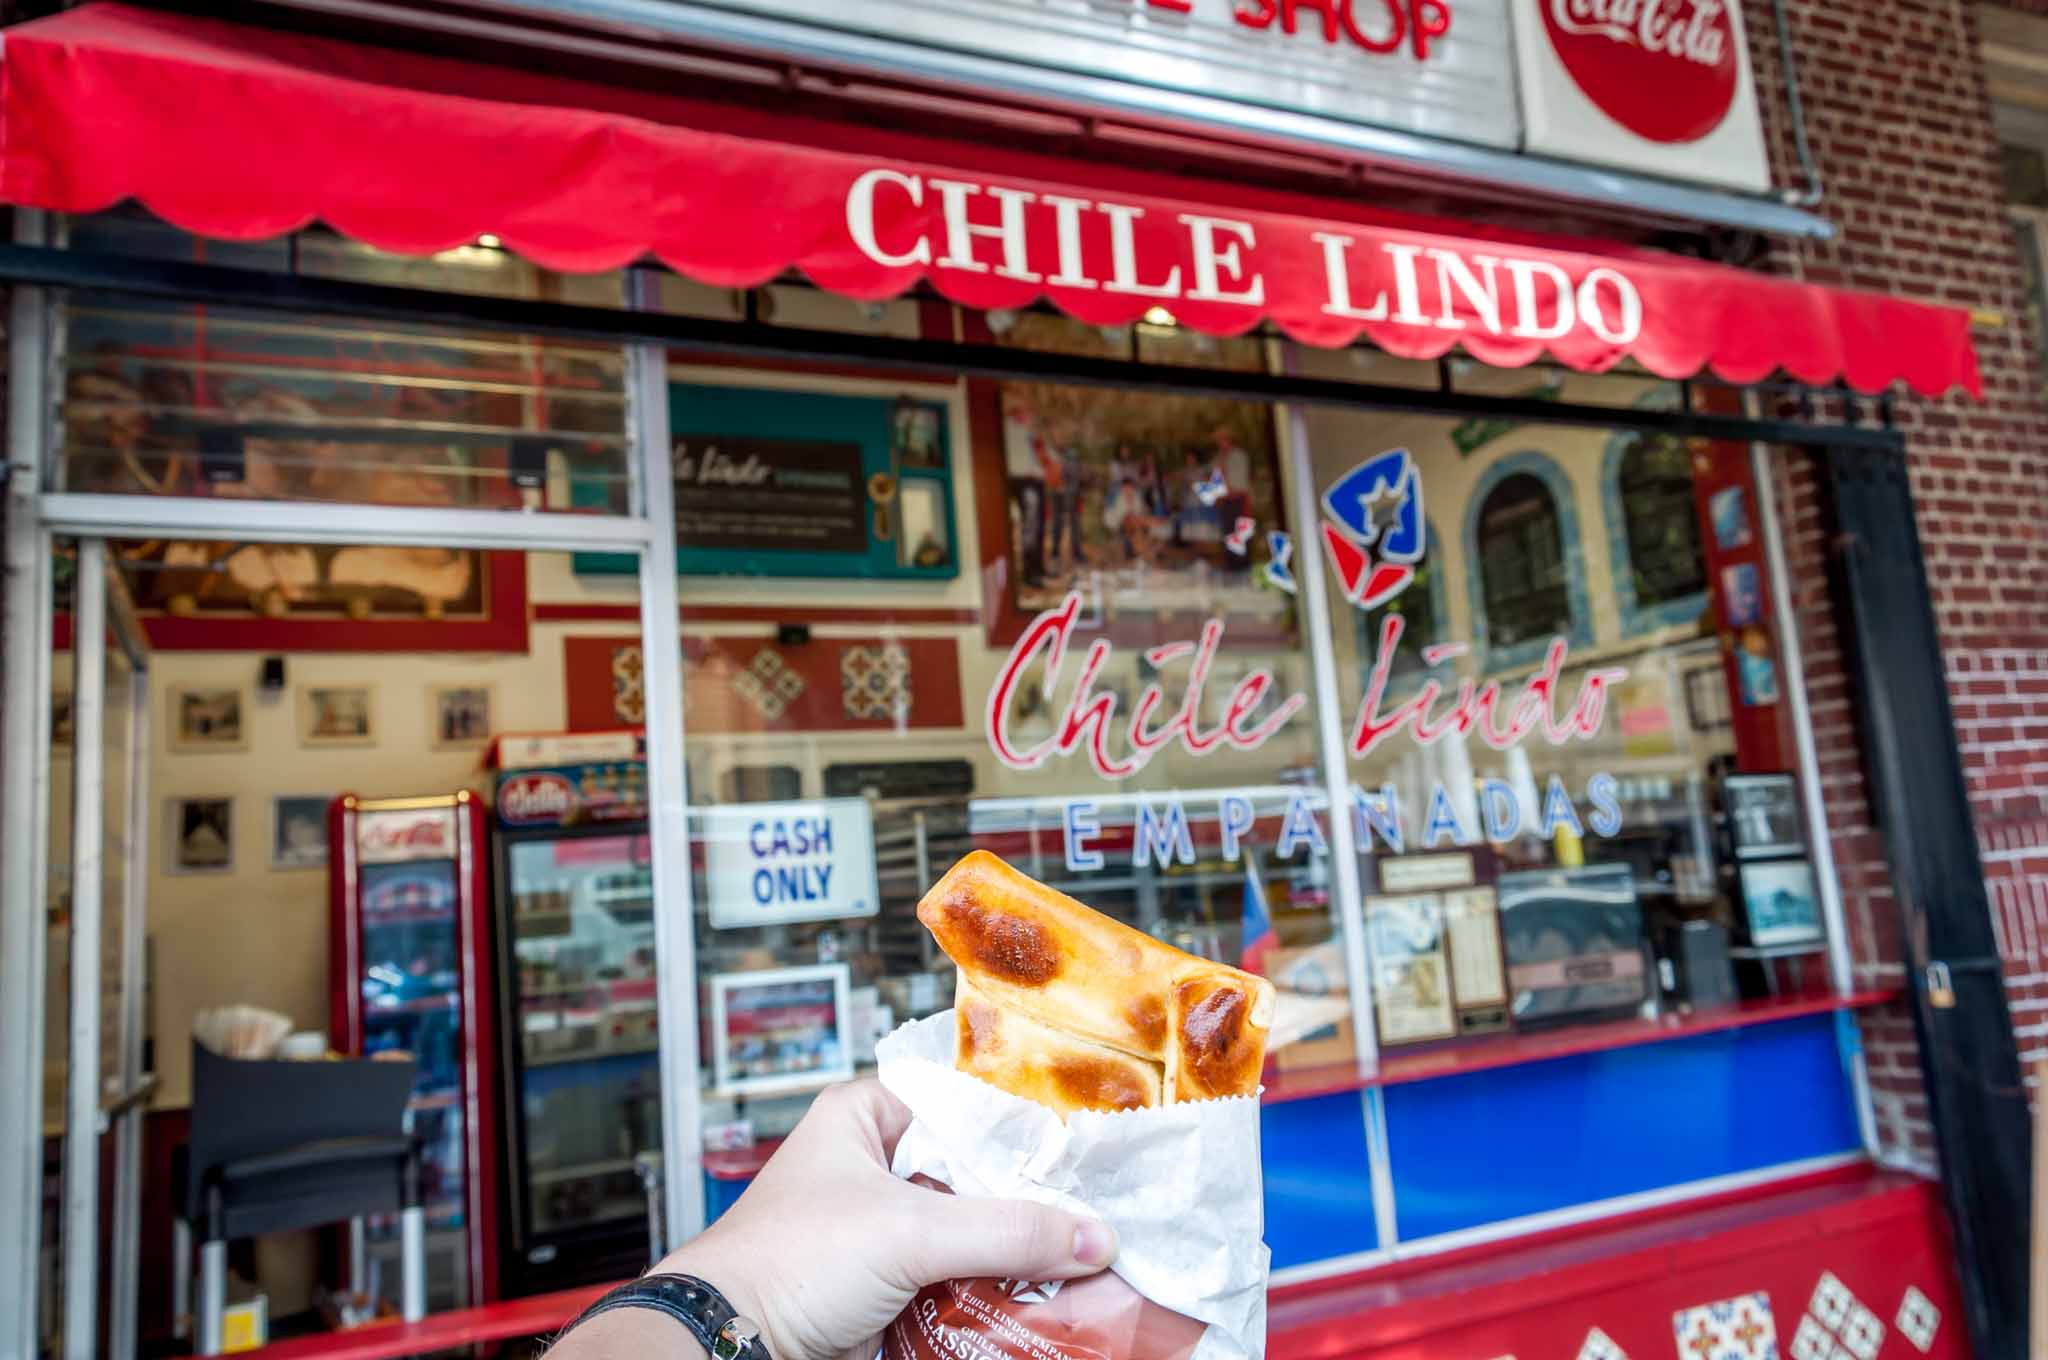 Chilean empanada in front of Chile Lindo storefront